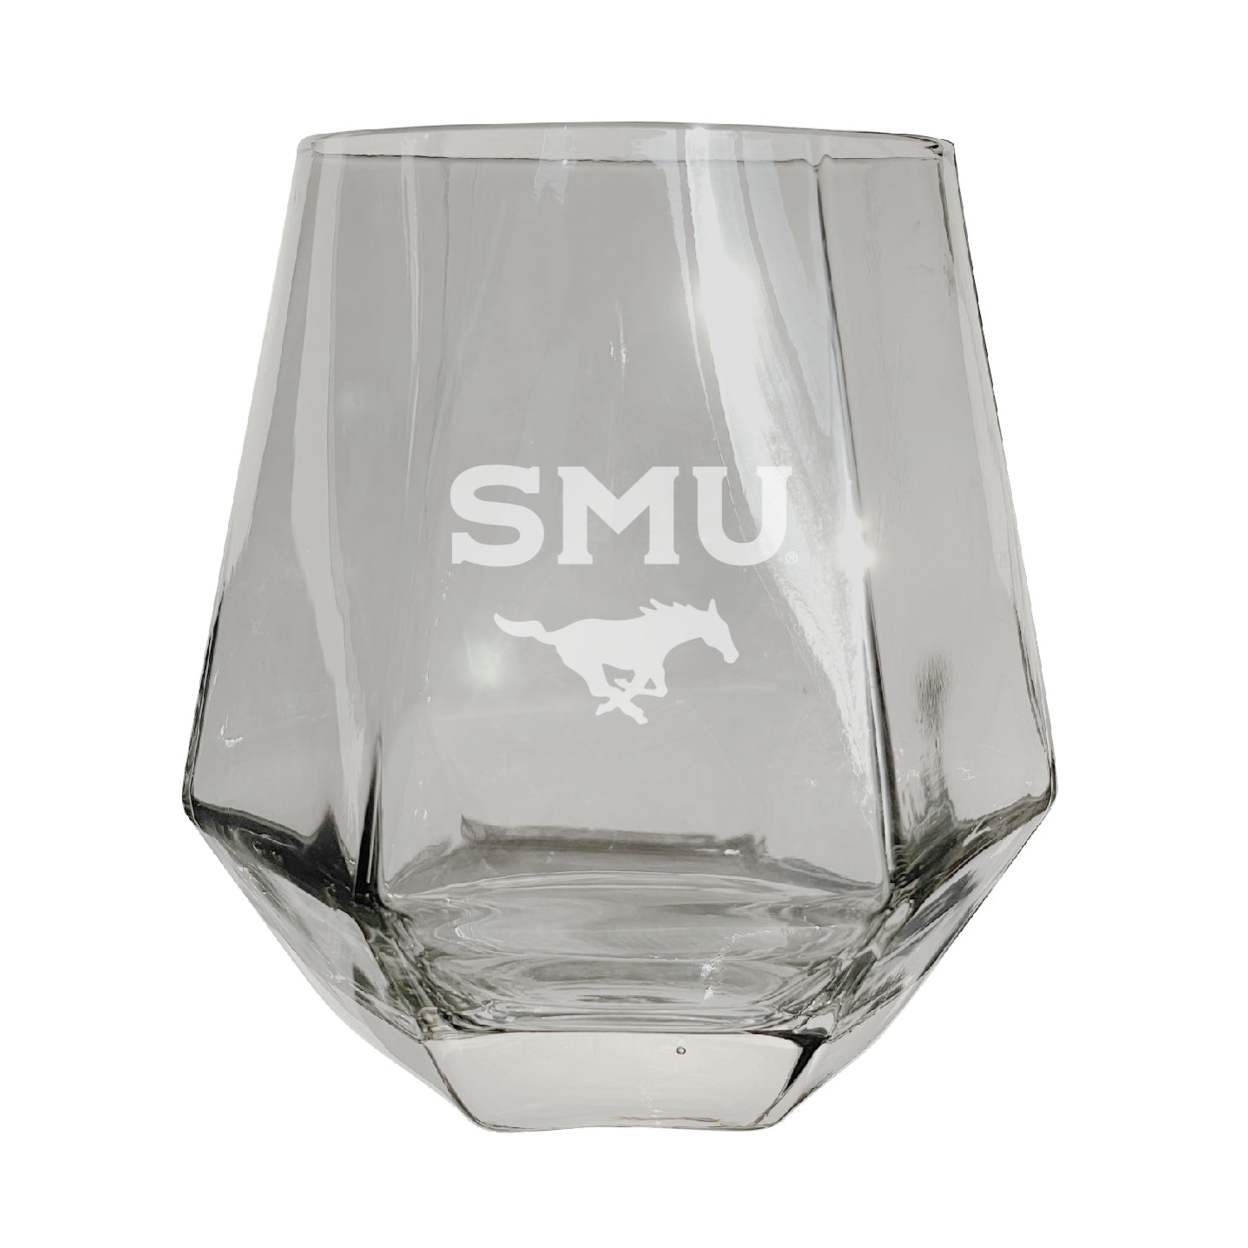 Southern Methodist University Etched Diamond Cut Stemless 10 Ounce Wine Glass Clear